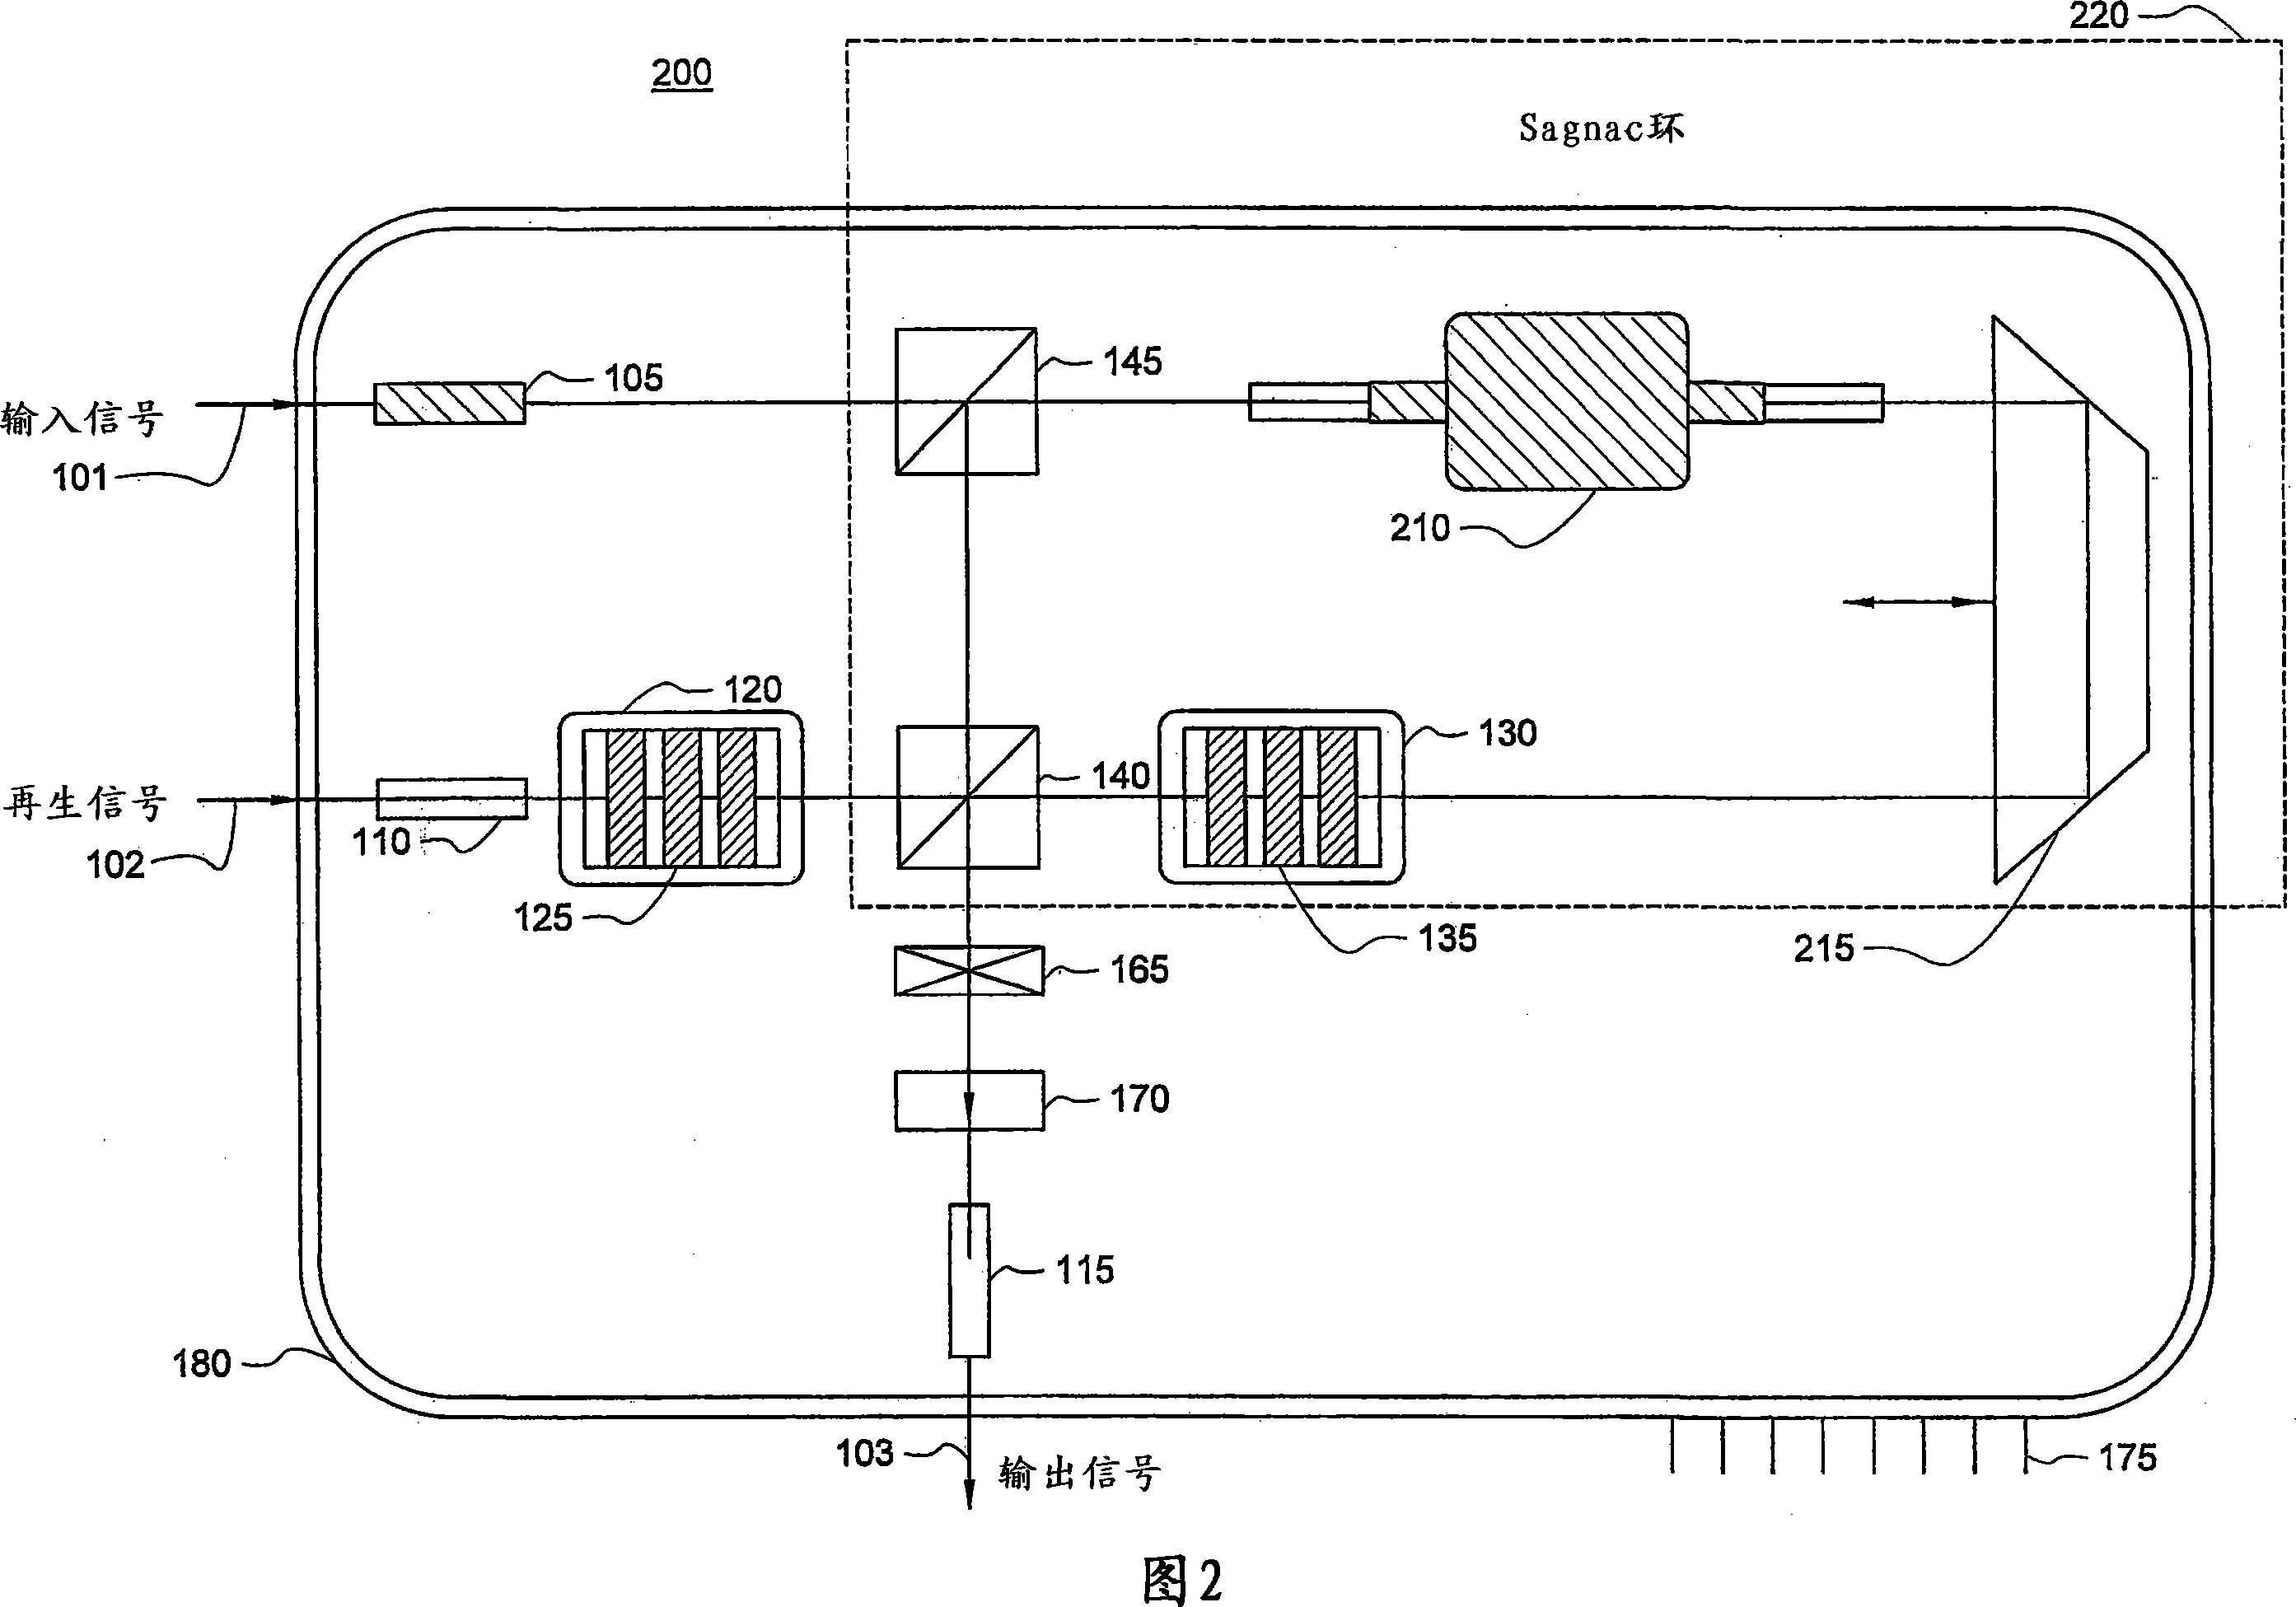 Systems and methods for all-optical signal regeneration based on free space optics